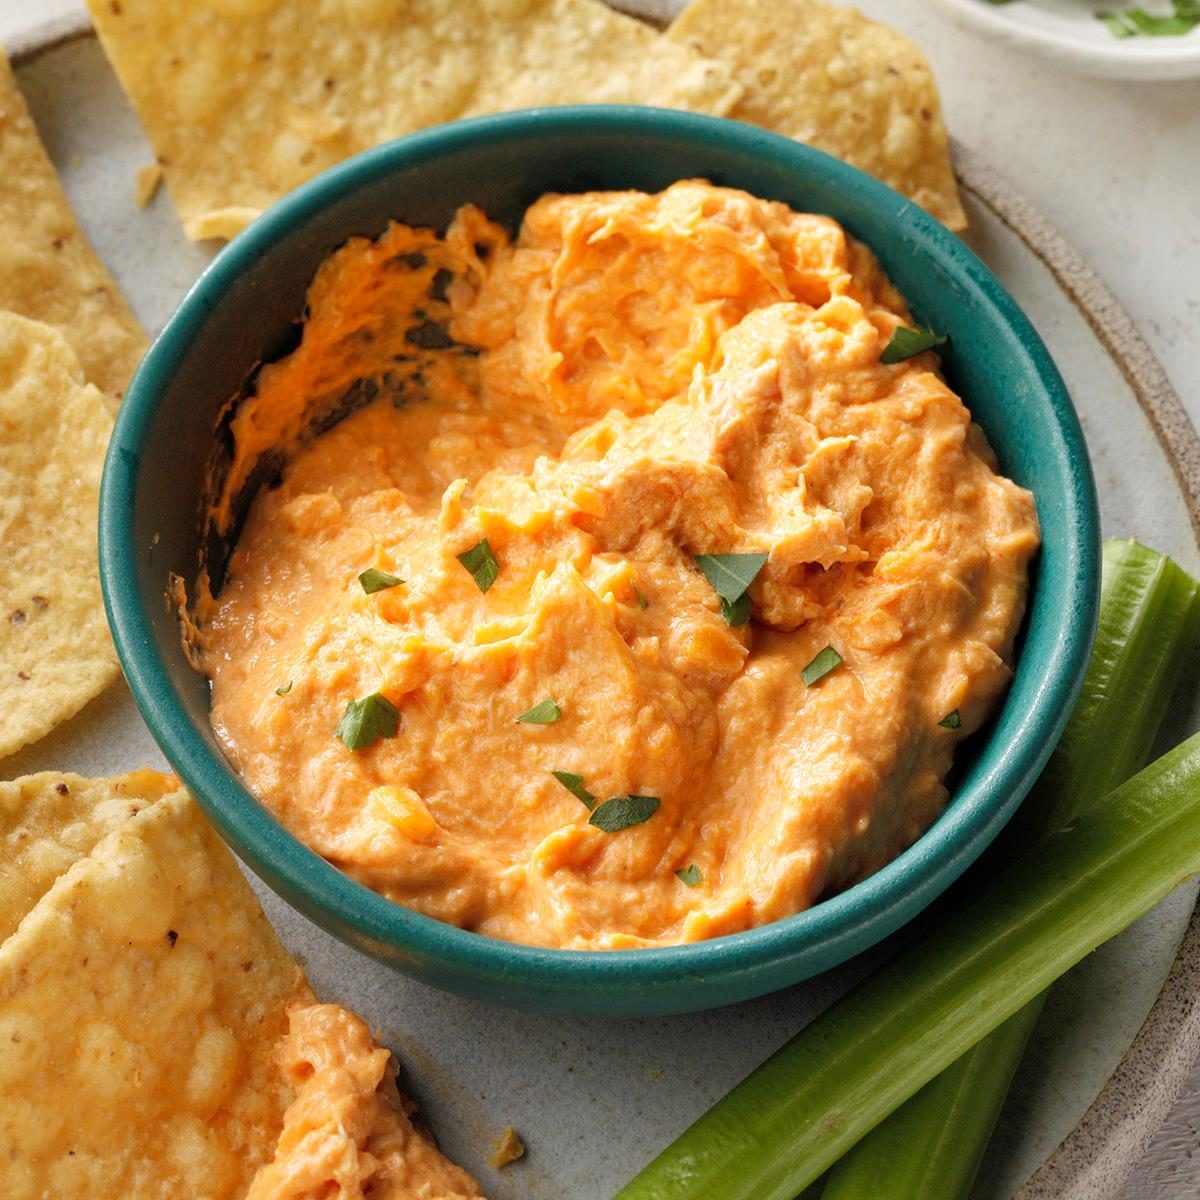 25 Dips for Chips We Can’t Stop Snacking On